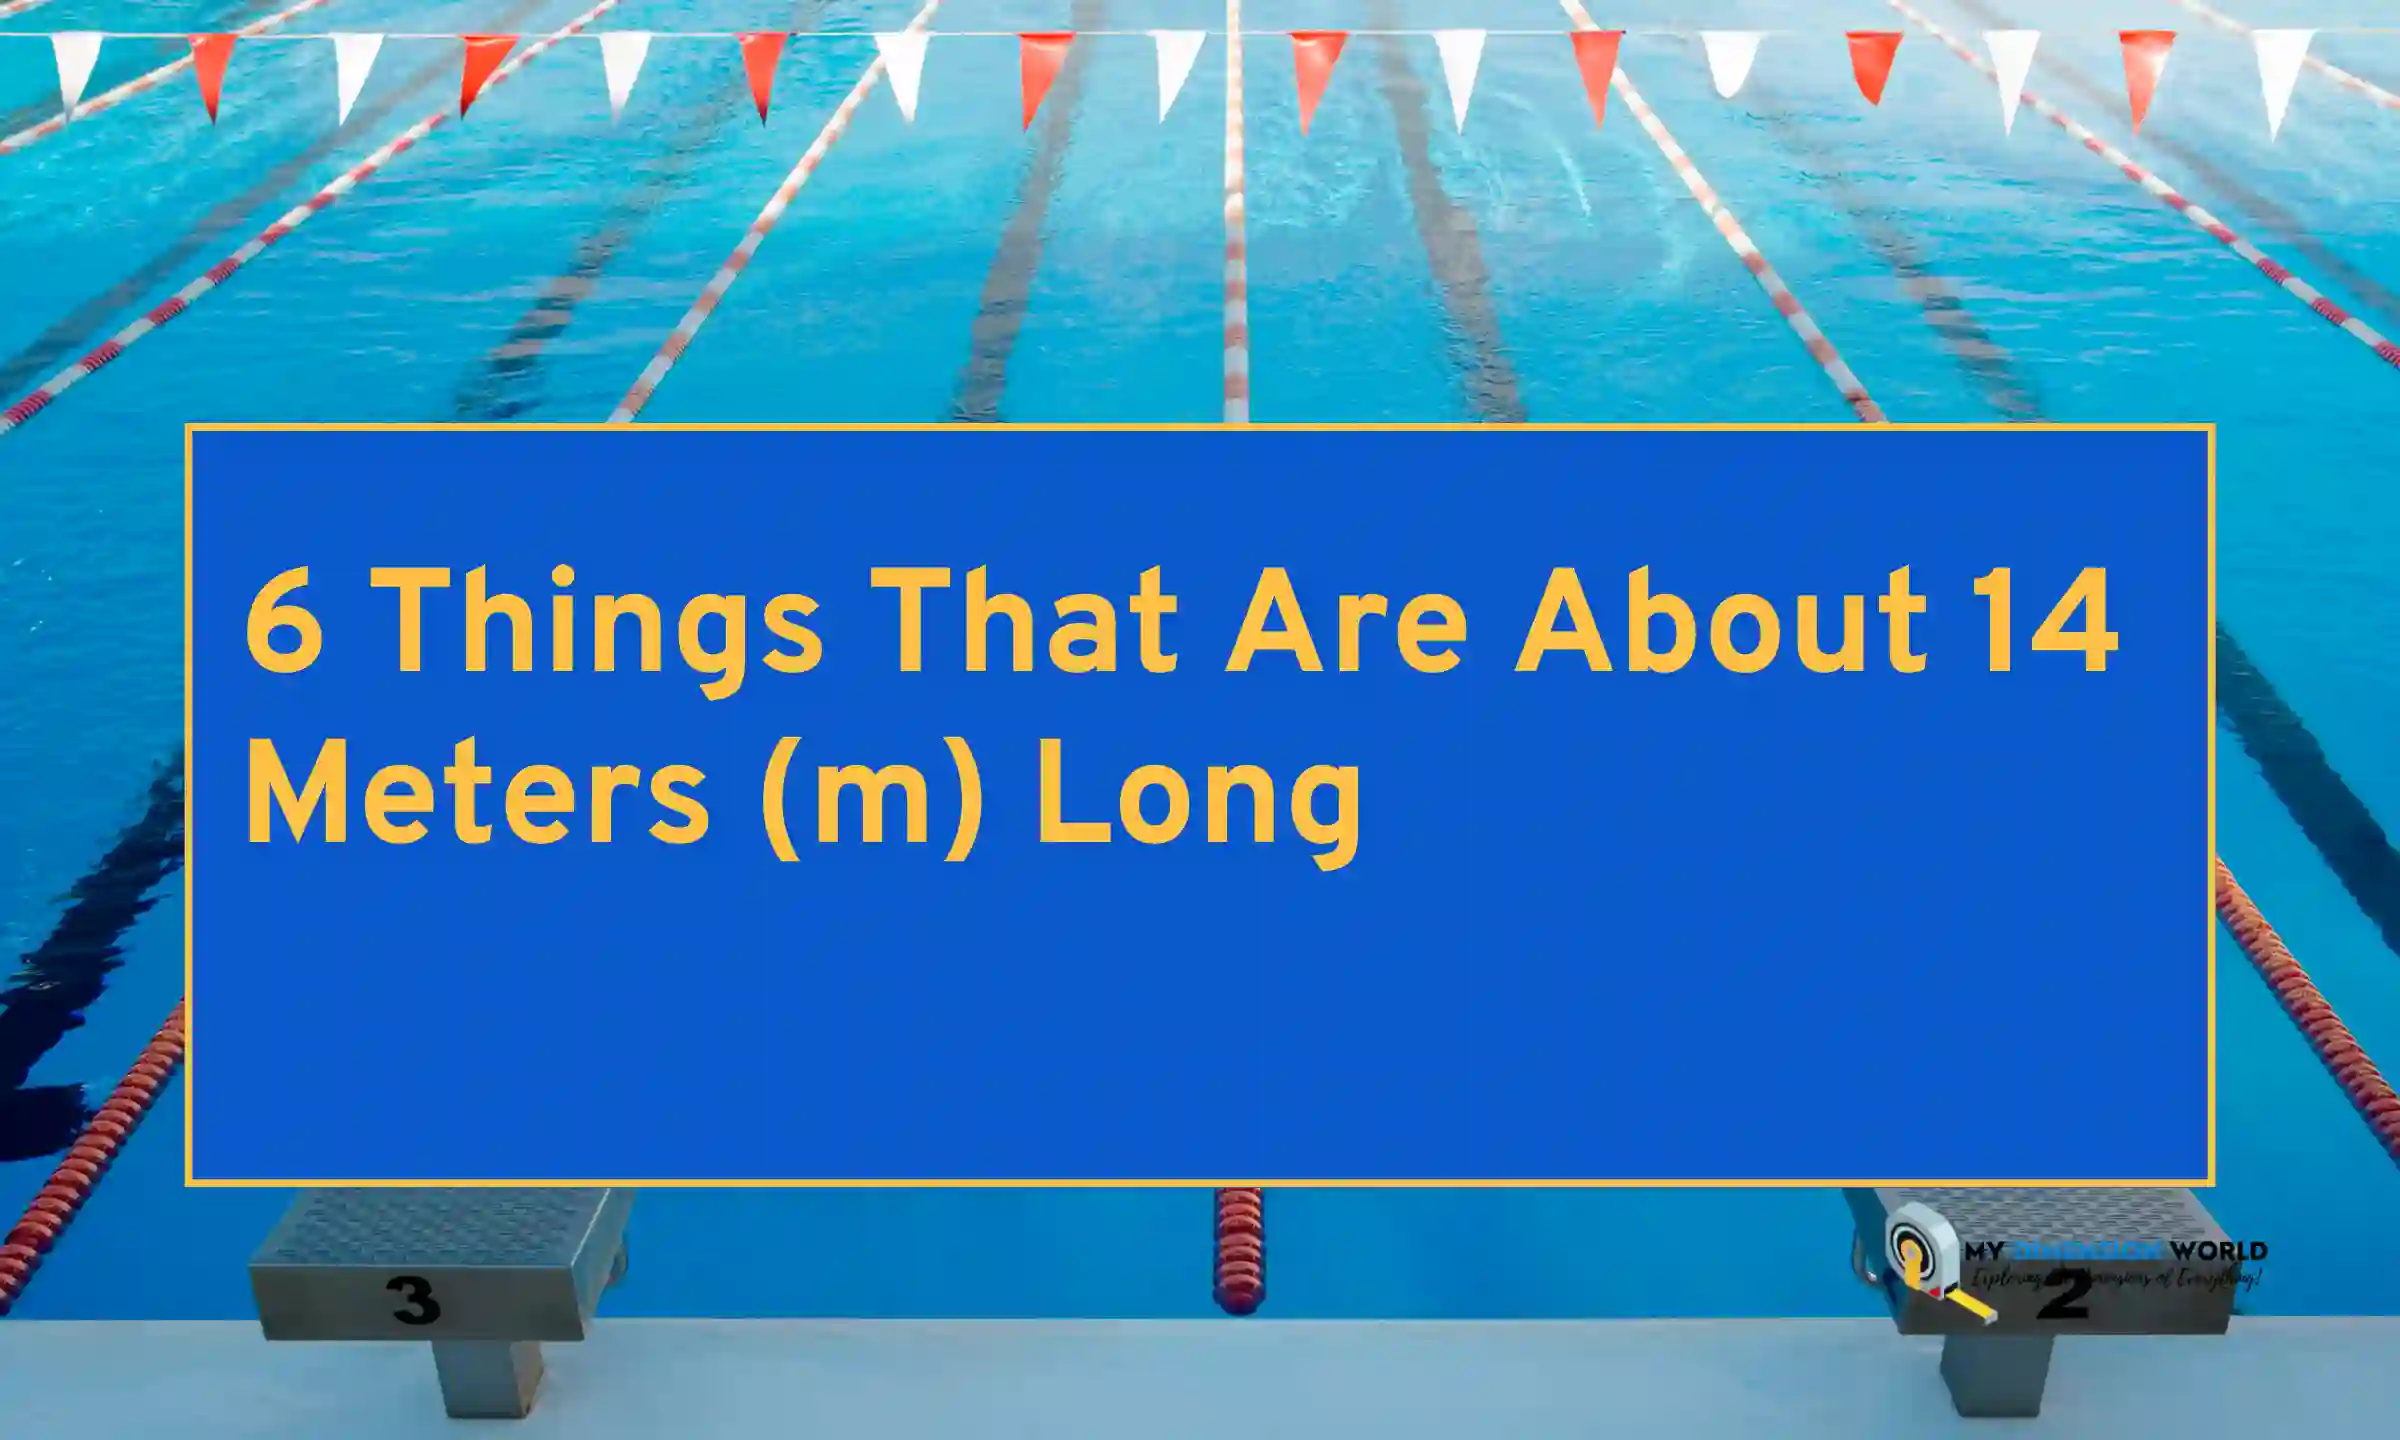 6 Things That Are About 14 Meters (m) Long